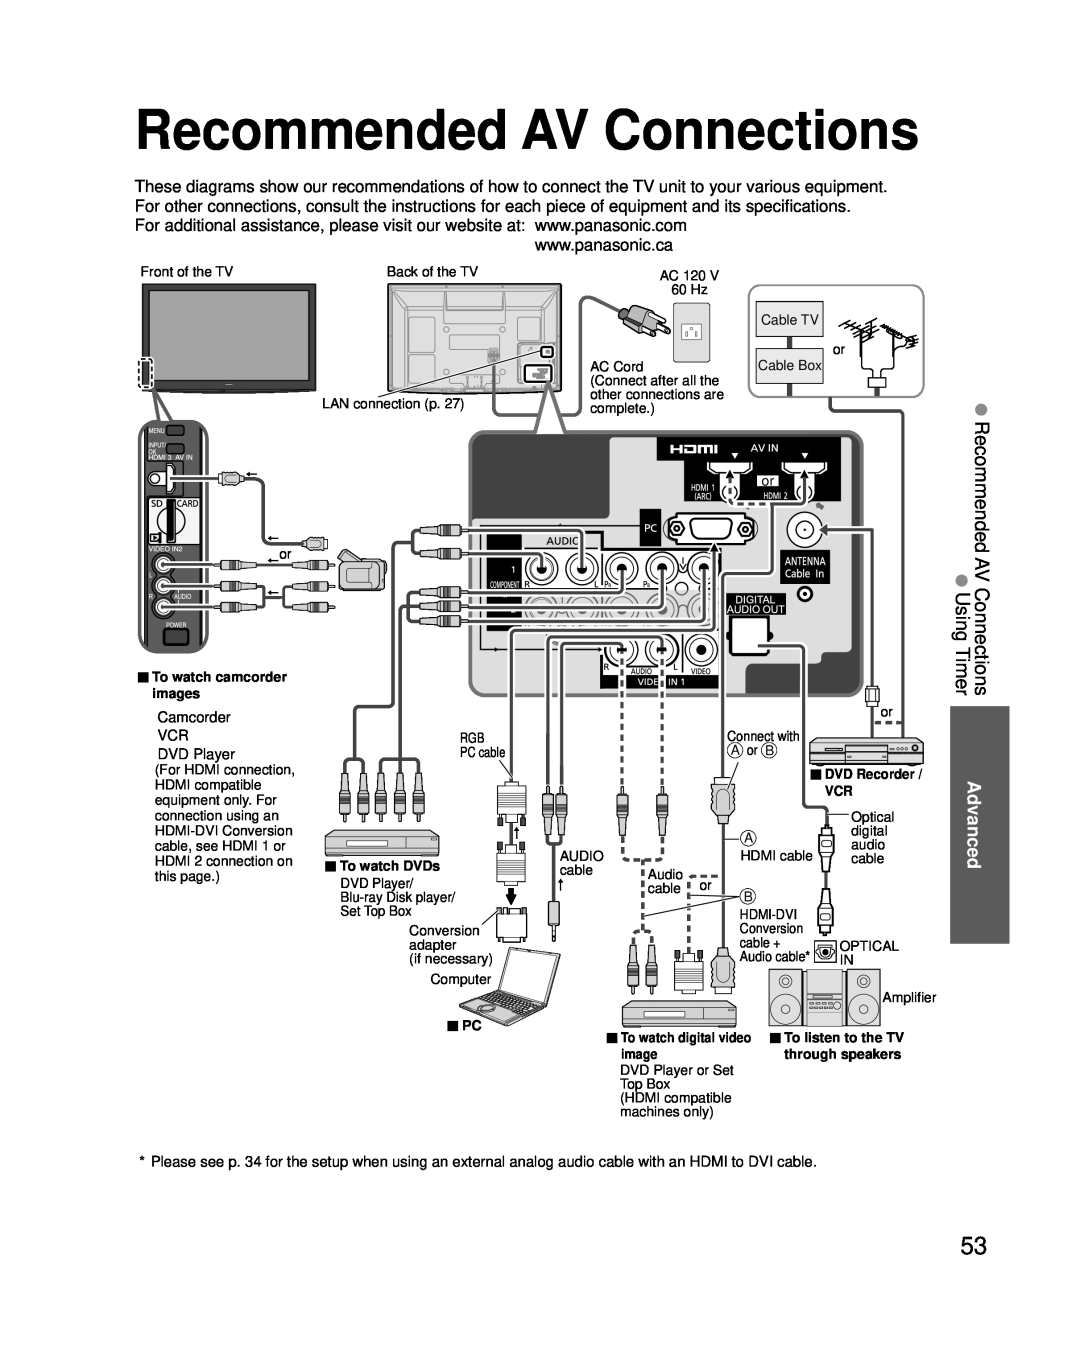 Panasonic TC-P46G25, TC-P42G25, TC-P50G25, TC-P54G25 quick start Recommended AV Connections, Timer, Advanced 